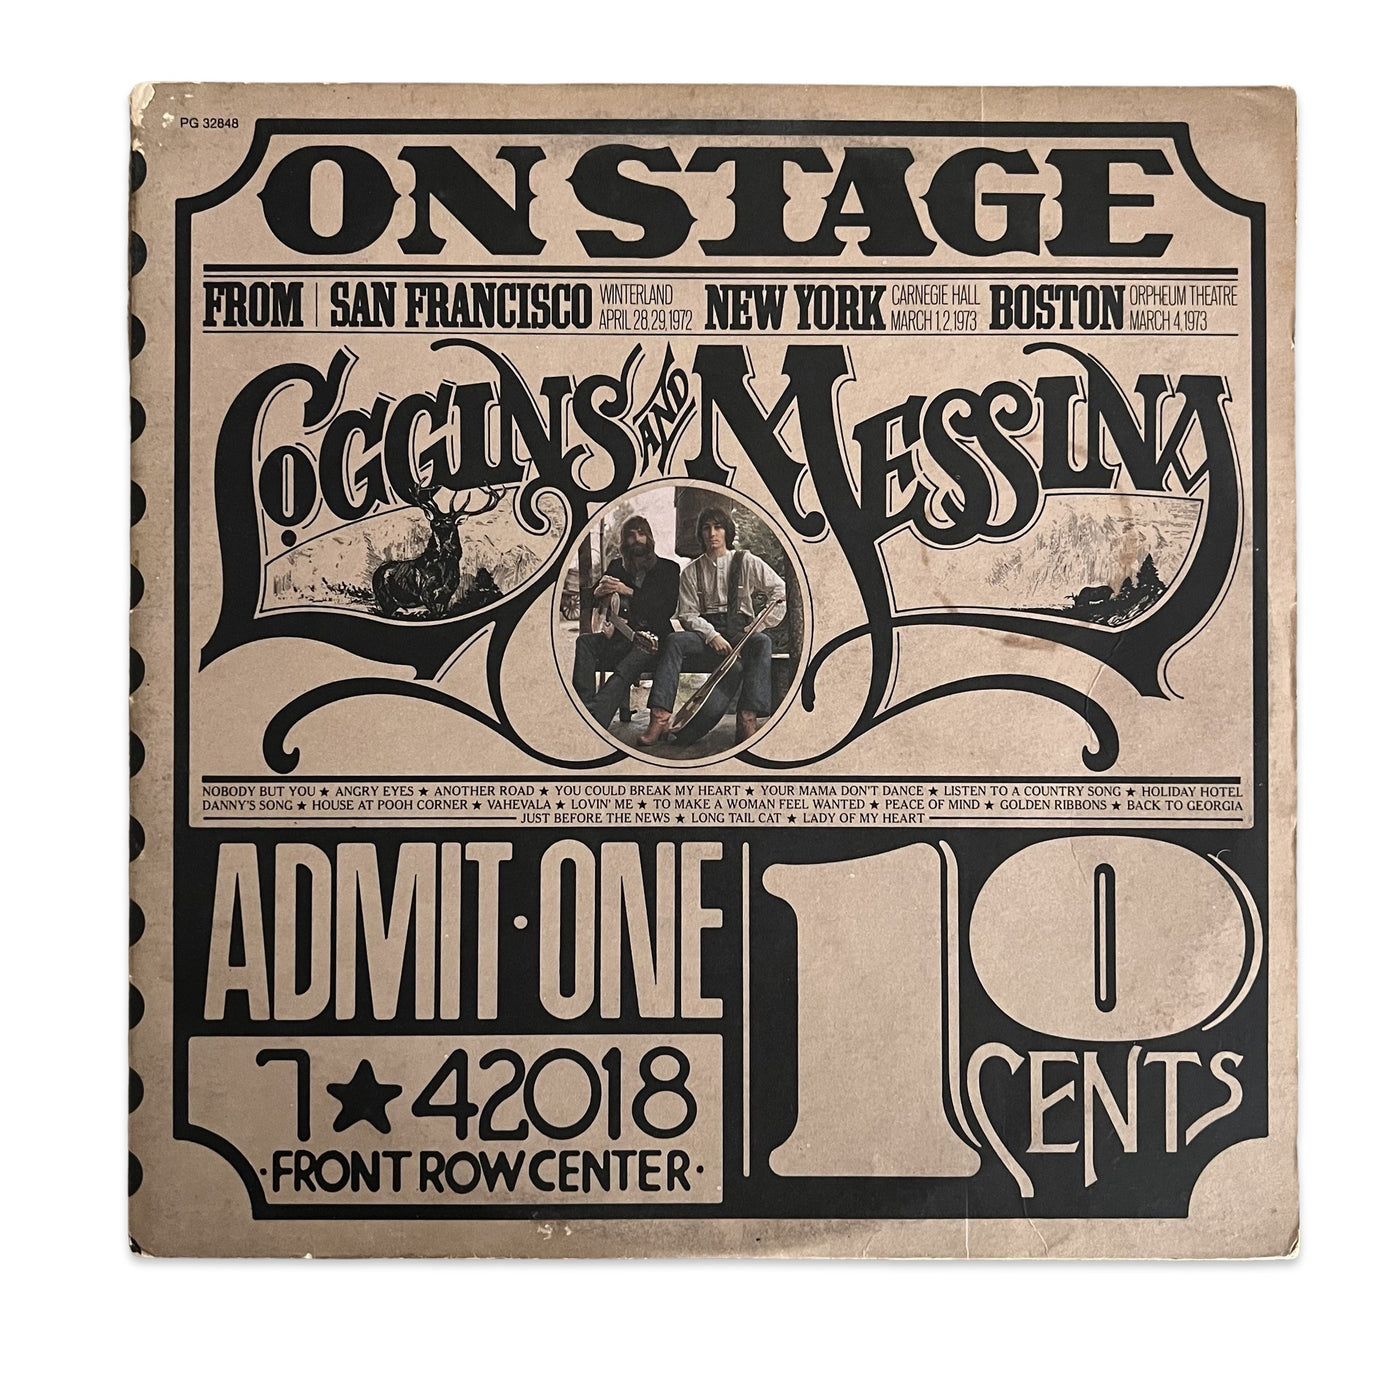 Loggins And Messina – On Stage